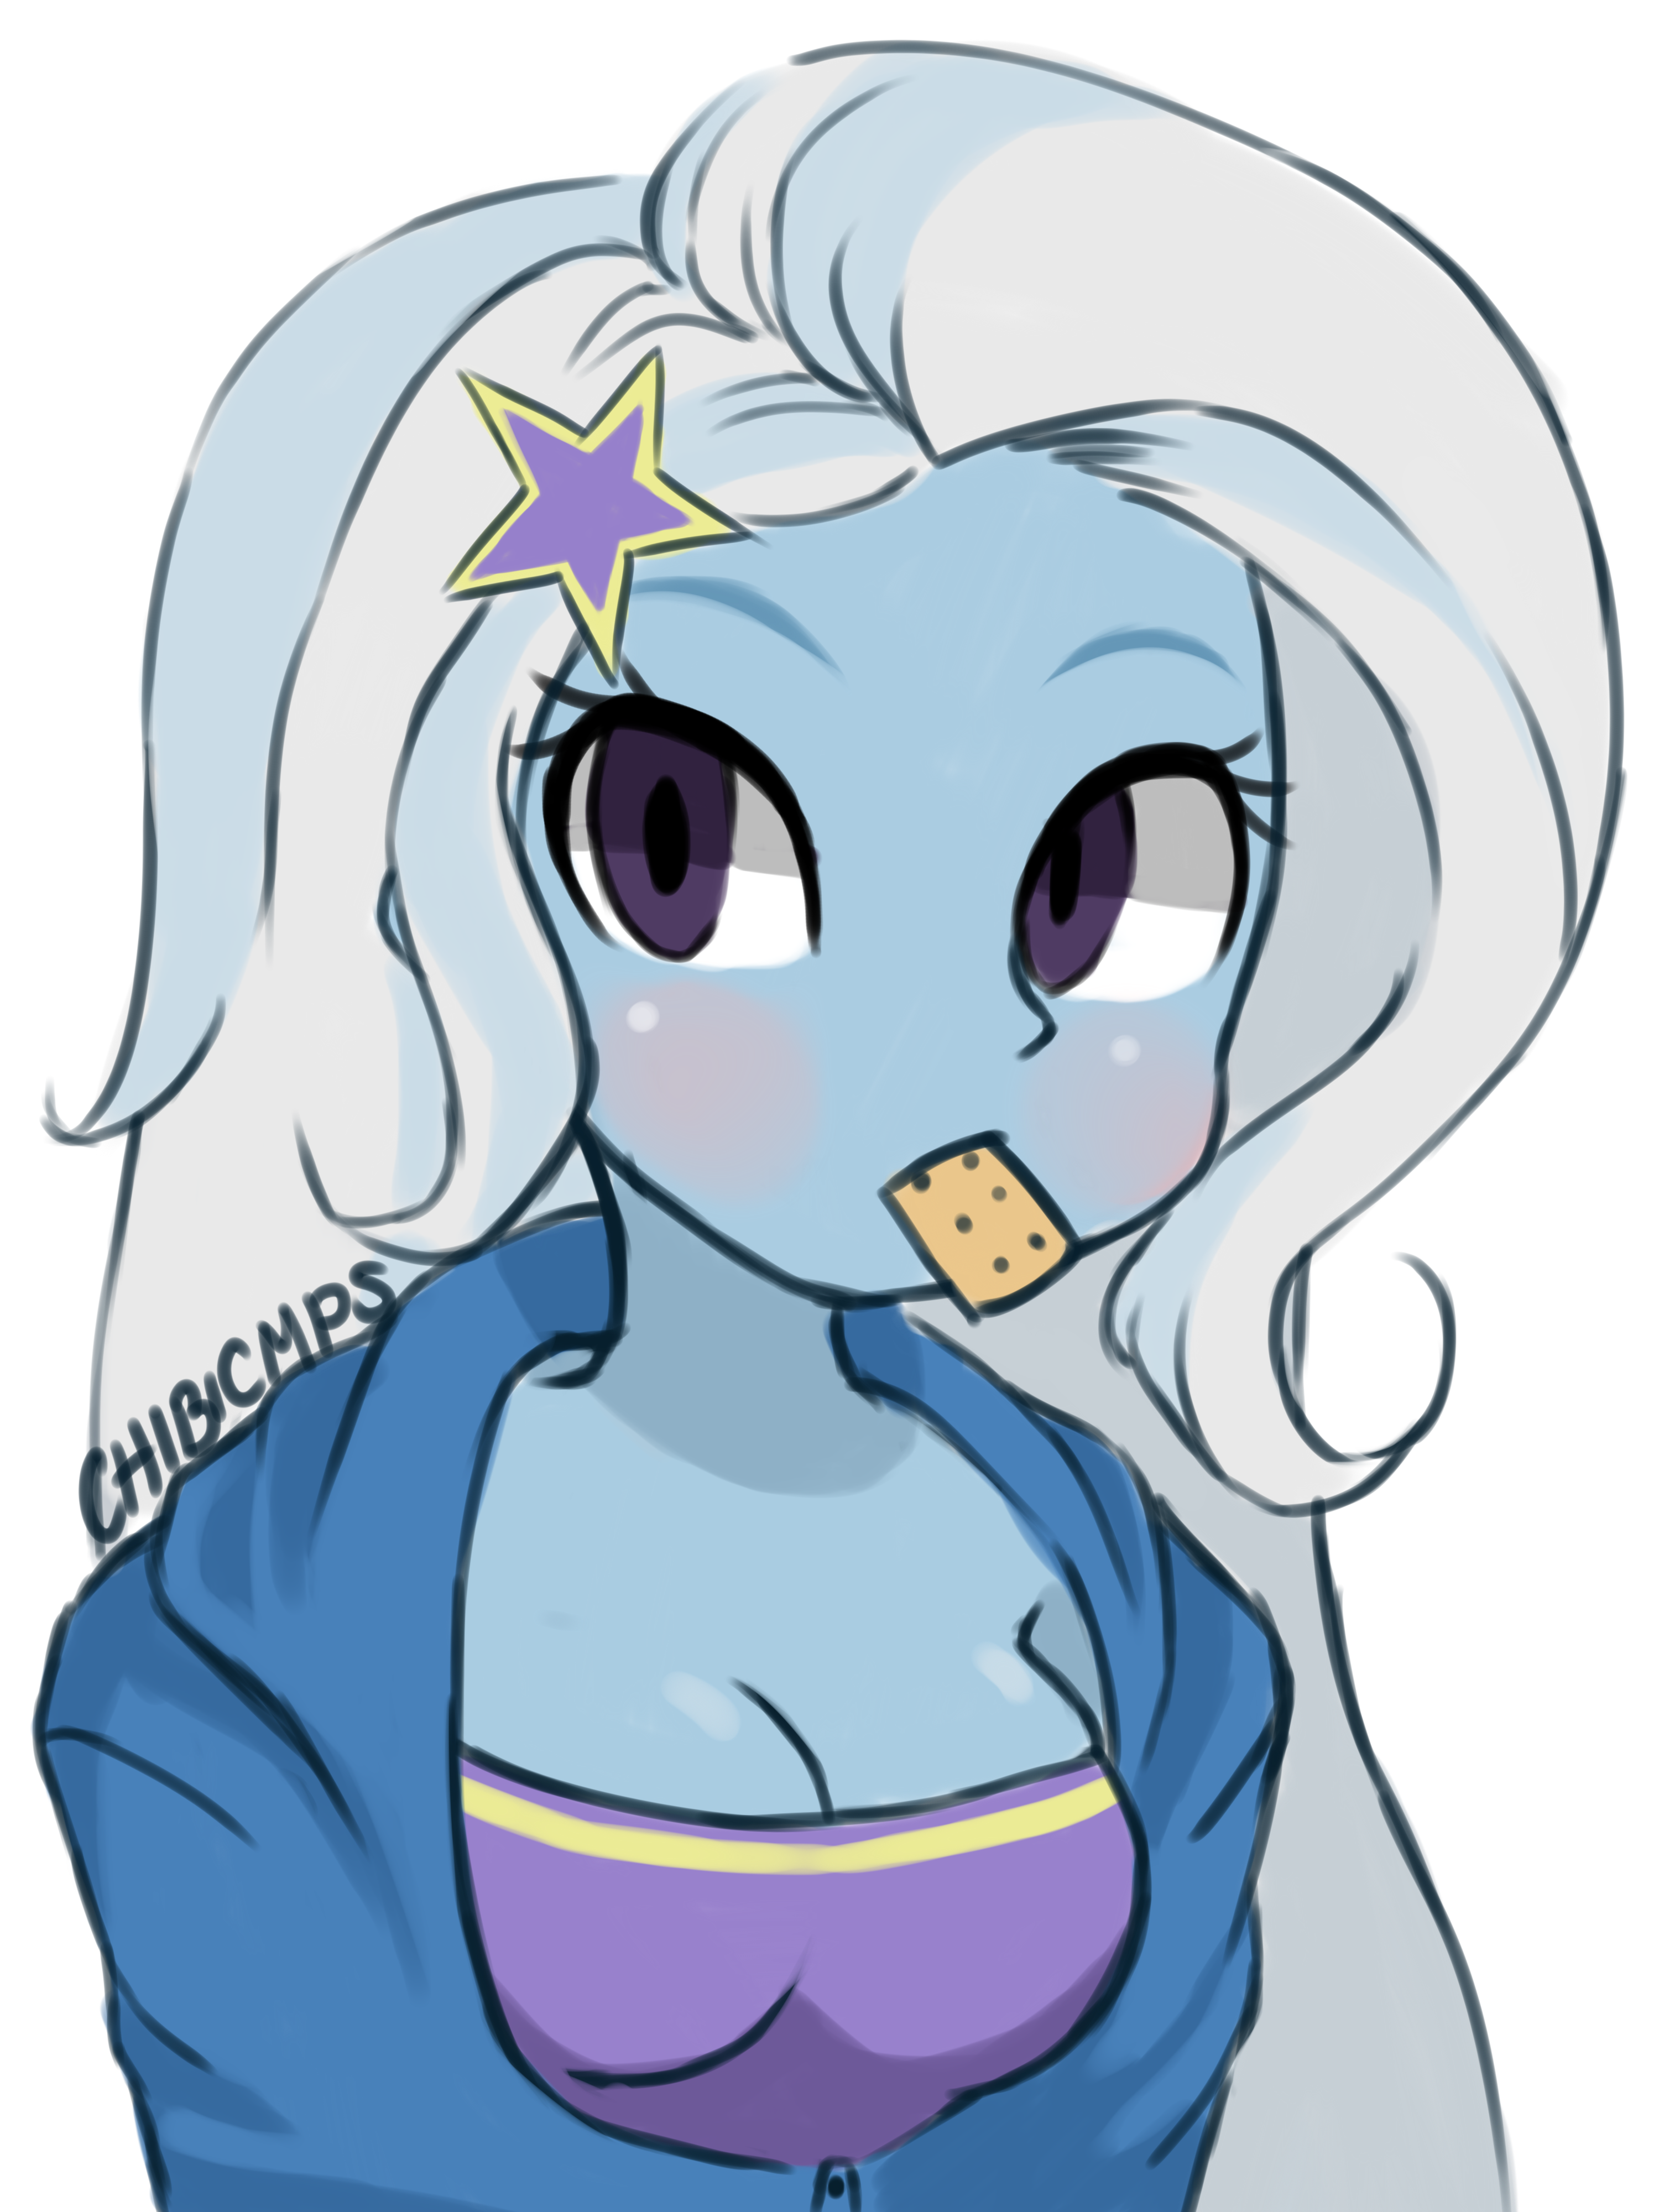 http://orig11.deviantart.net/8da3/f/2015/077/2/7/trixie_by_chibicmps-d8m8yfb.png